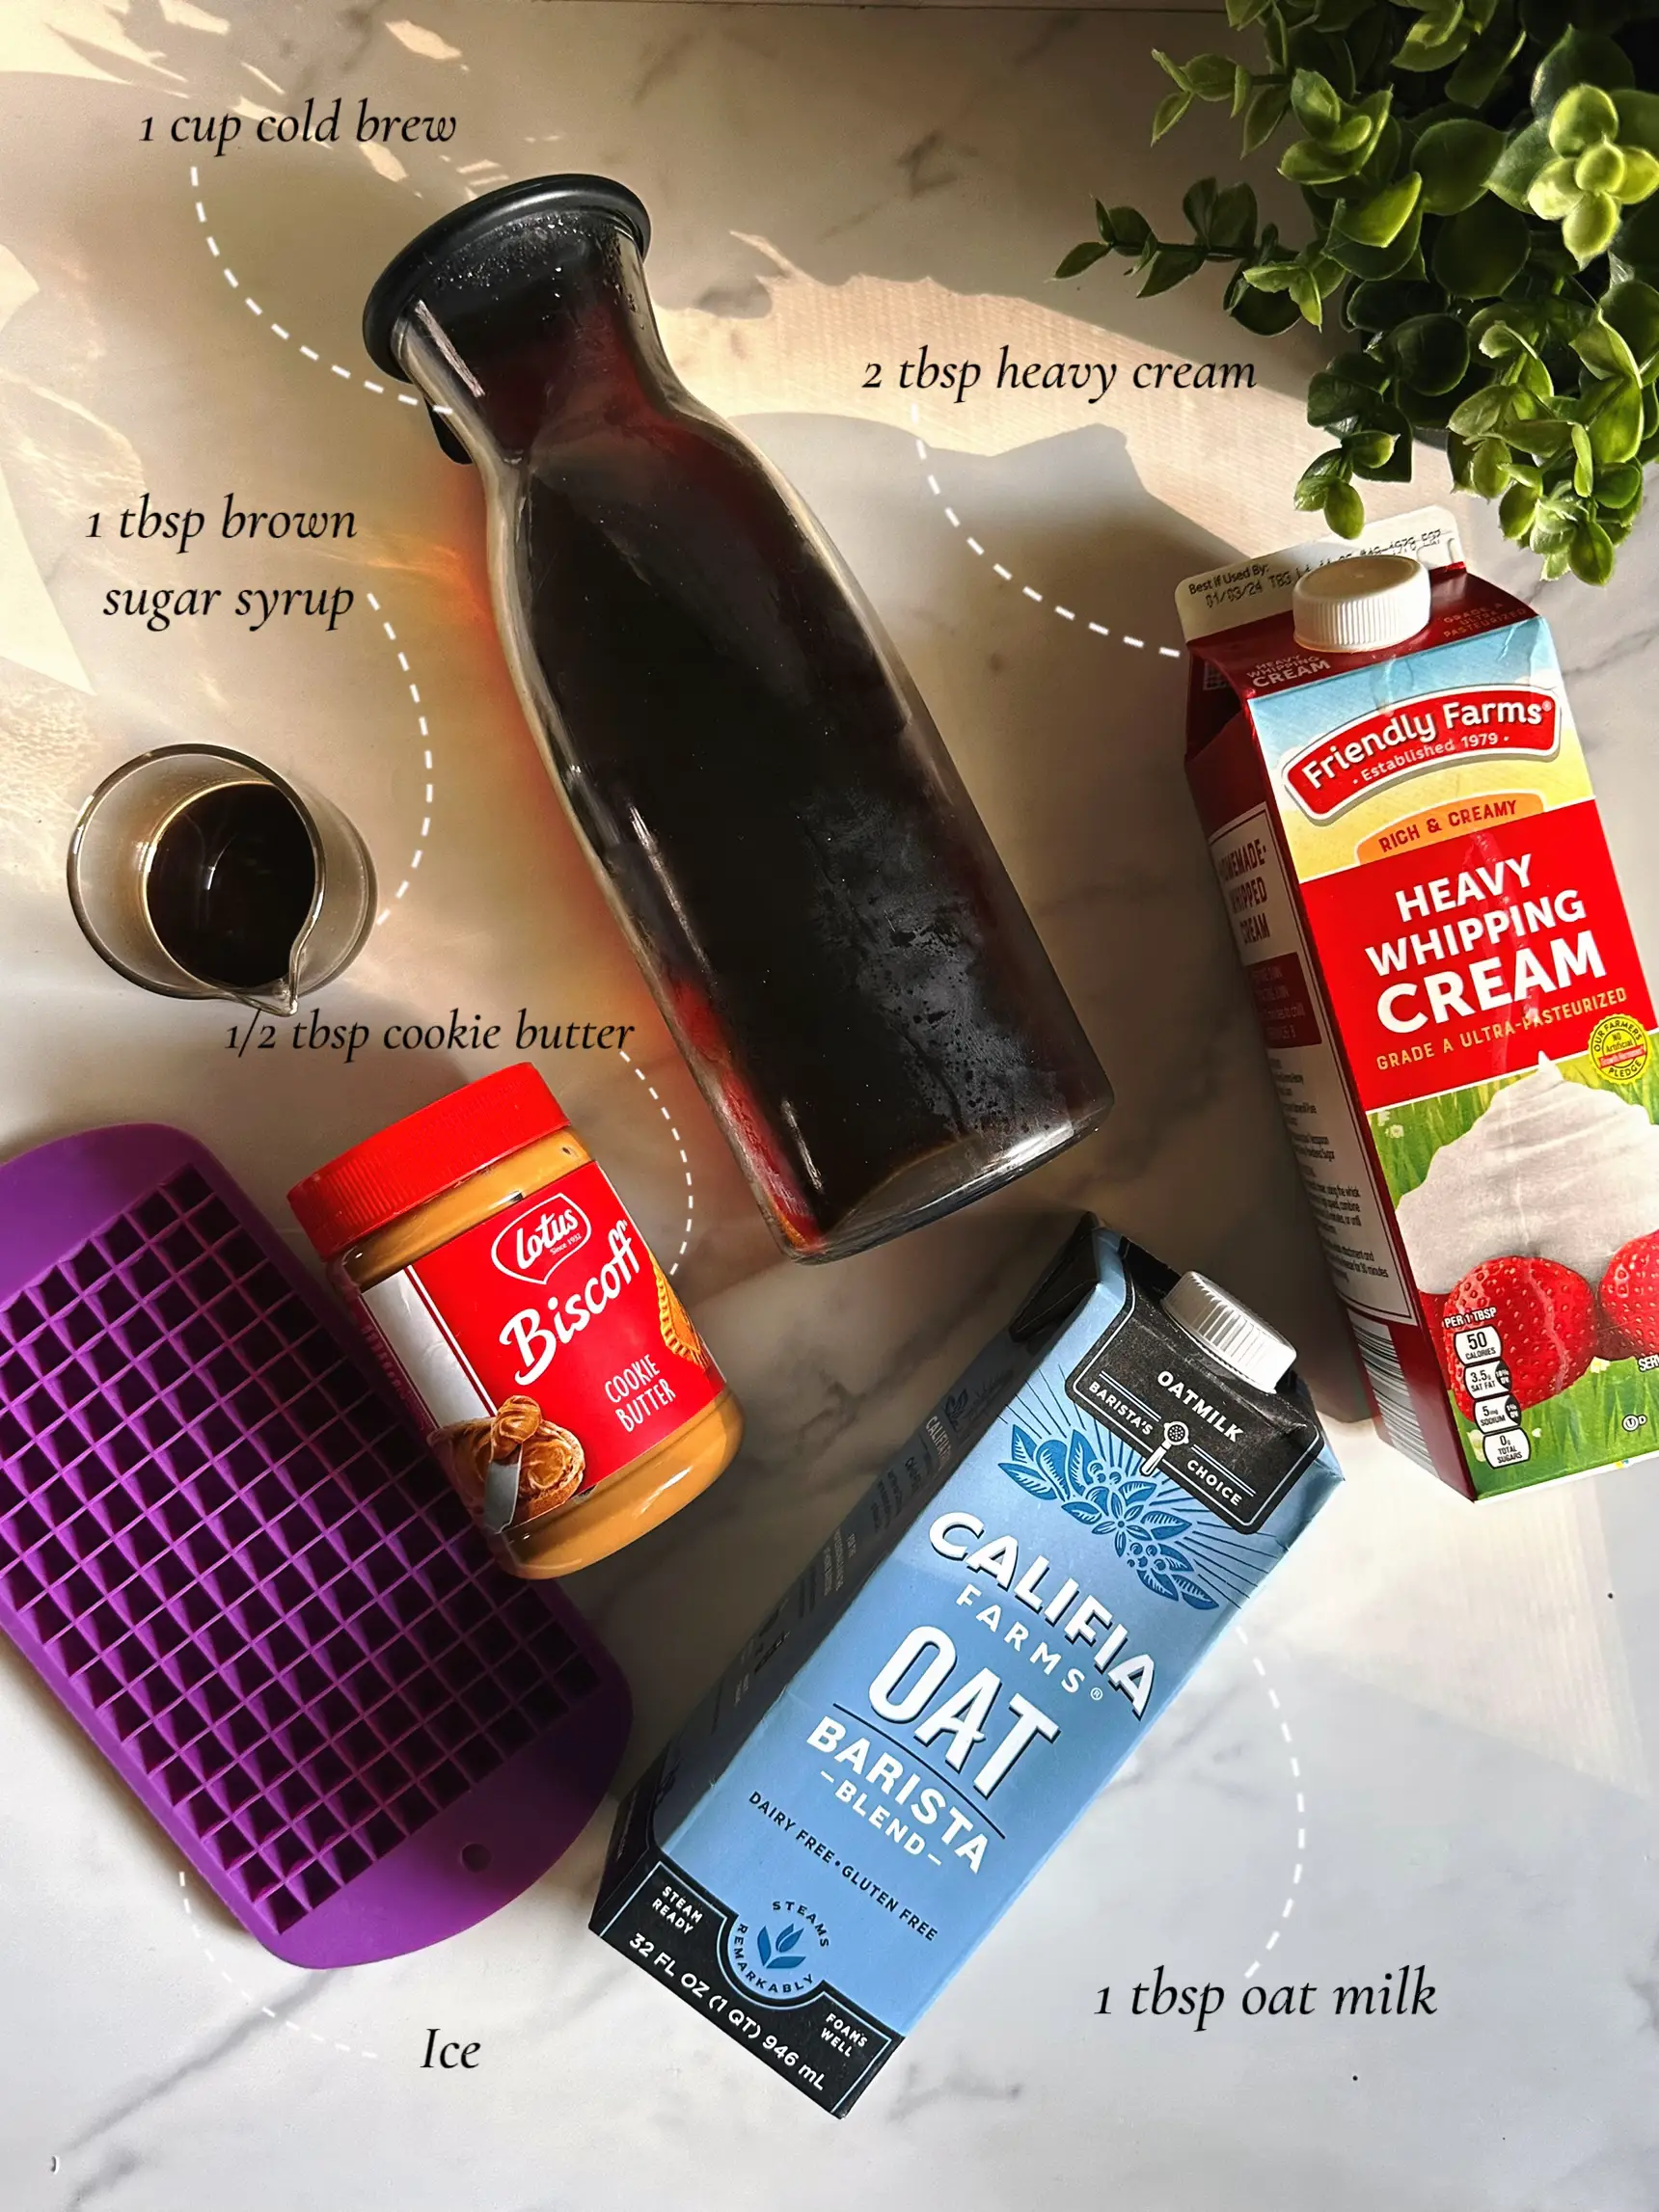  A bottle of oat milk, a carton of heavy whipping cream, a bottle of brown sugar syrup and a cup of cold brew are placed on a table.